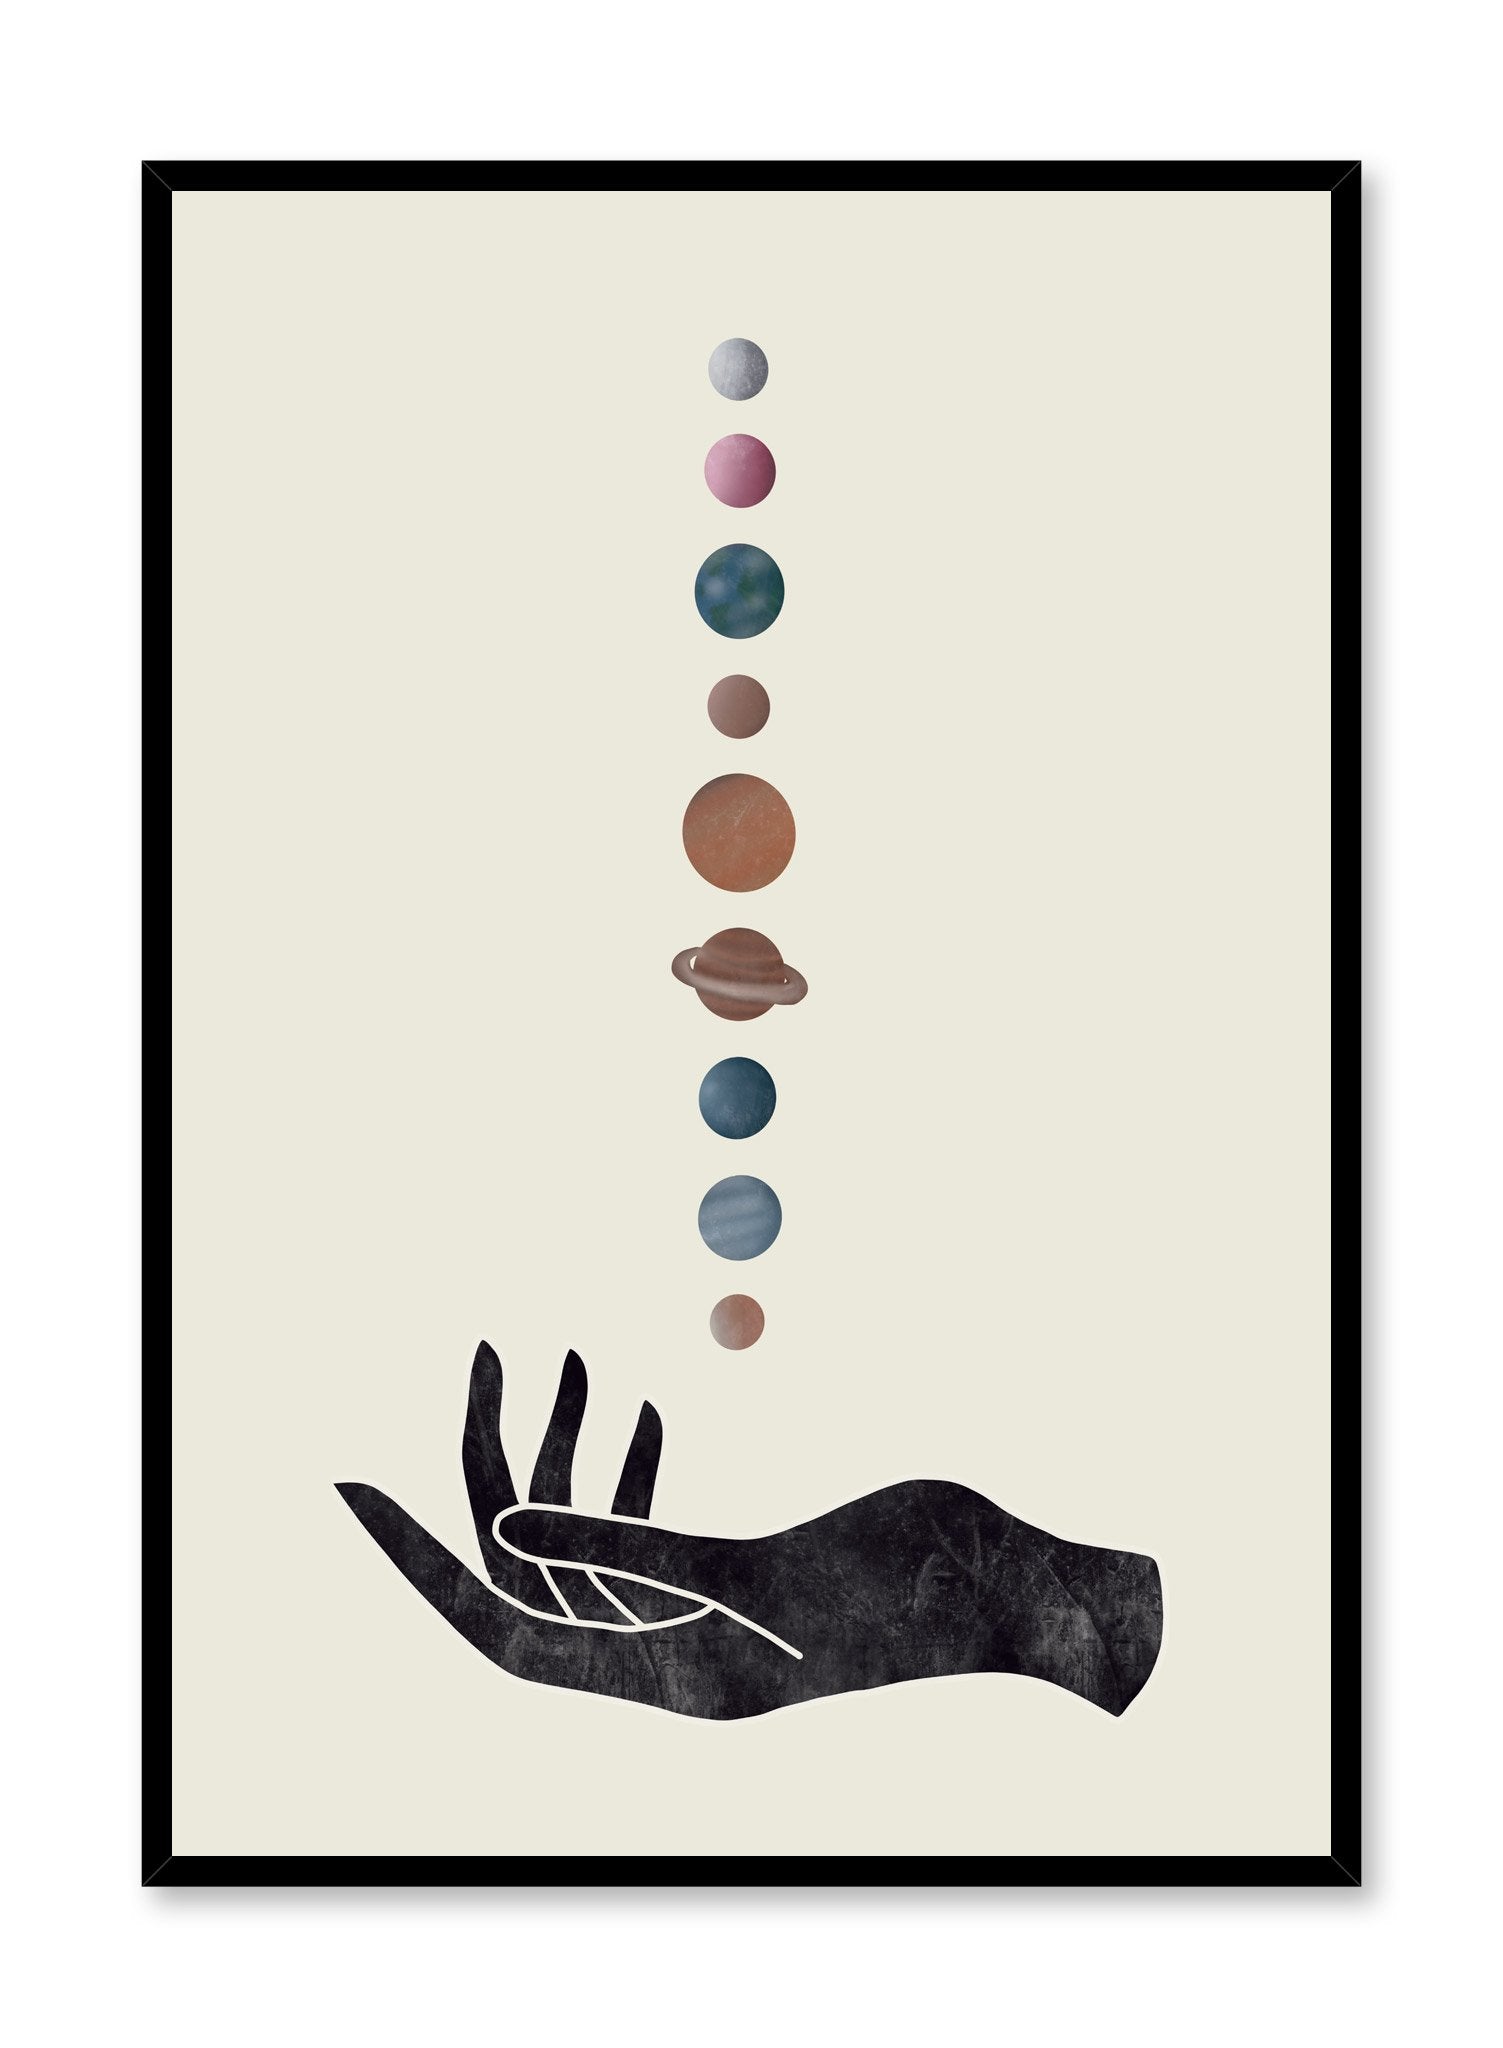 Celestial illustration poster by Opposite Wall with solar system